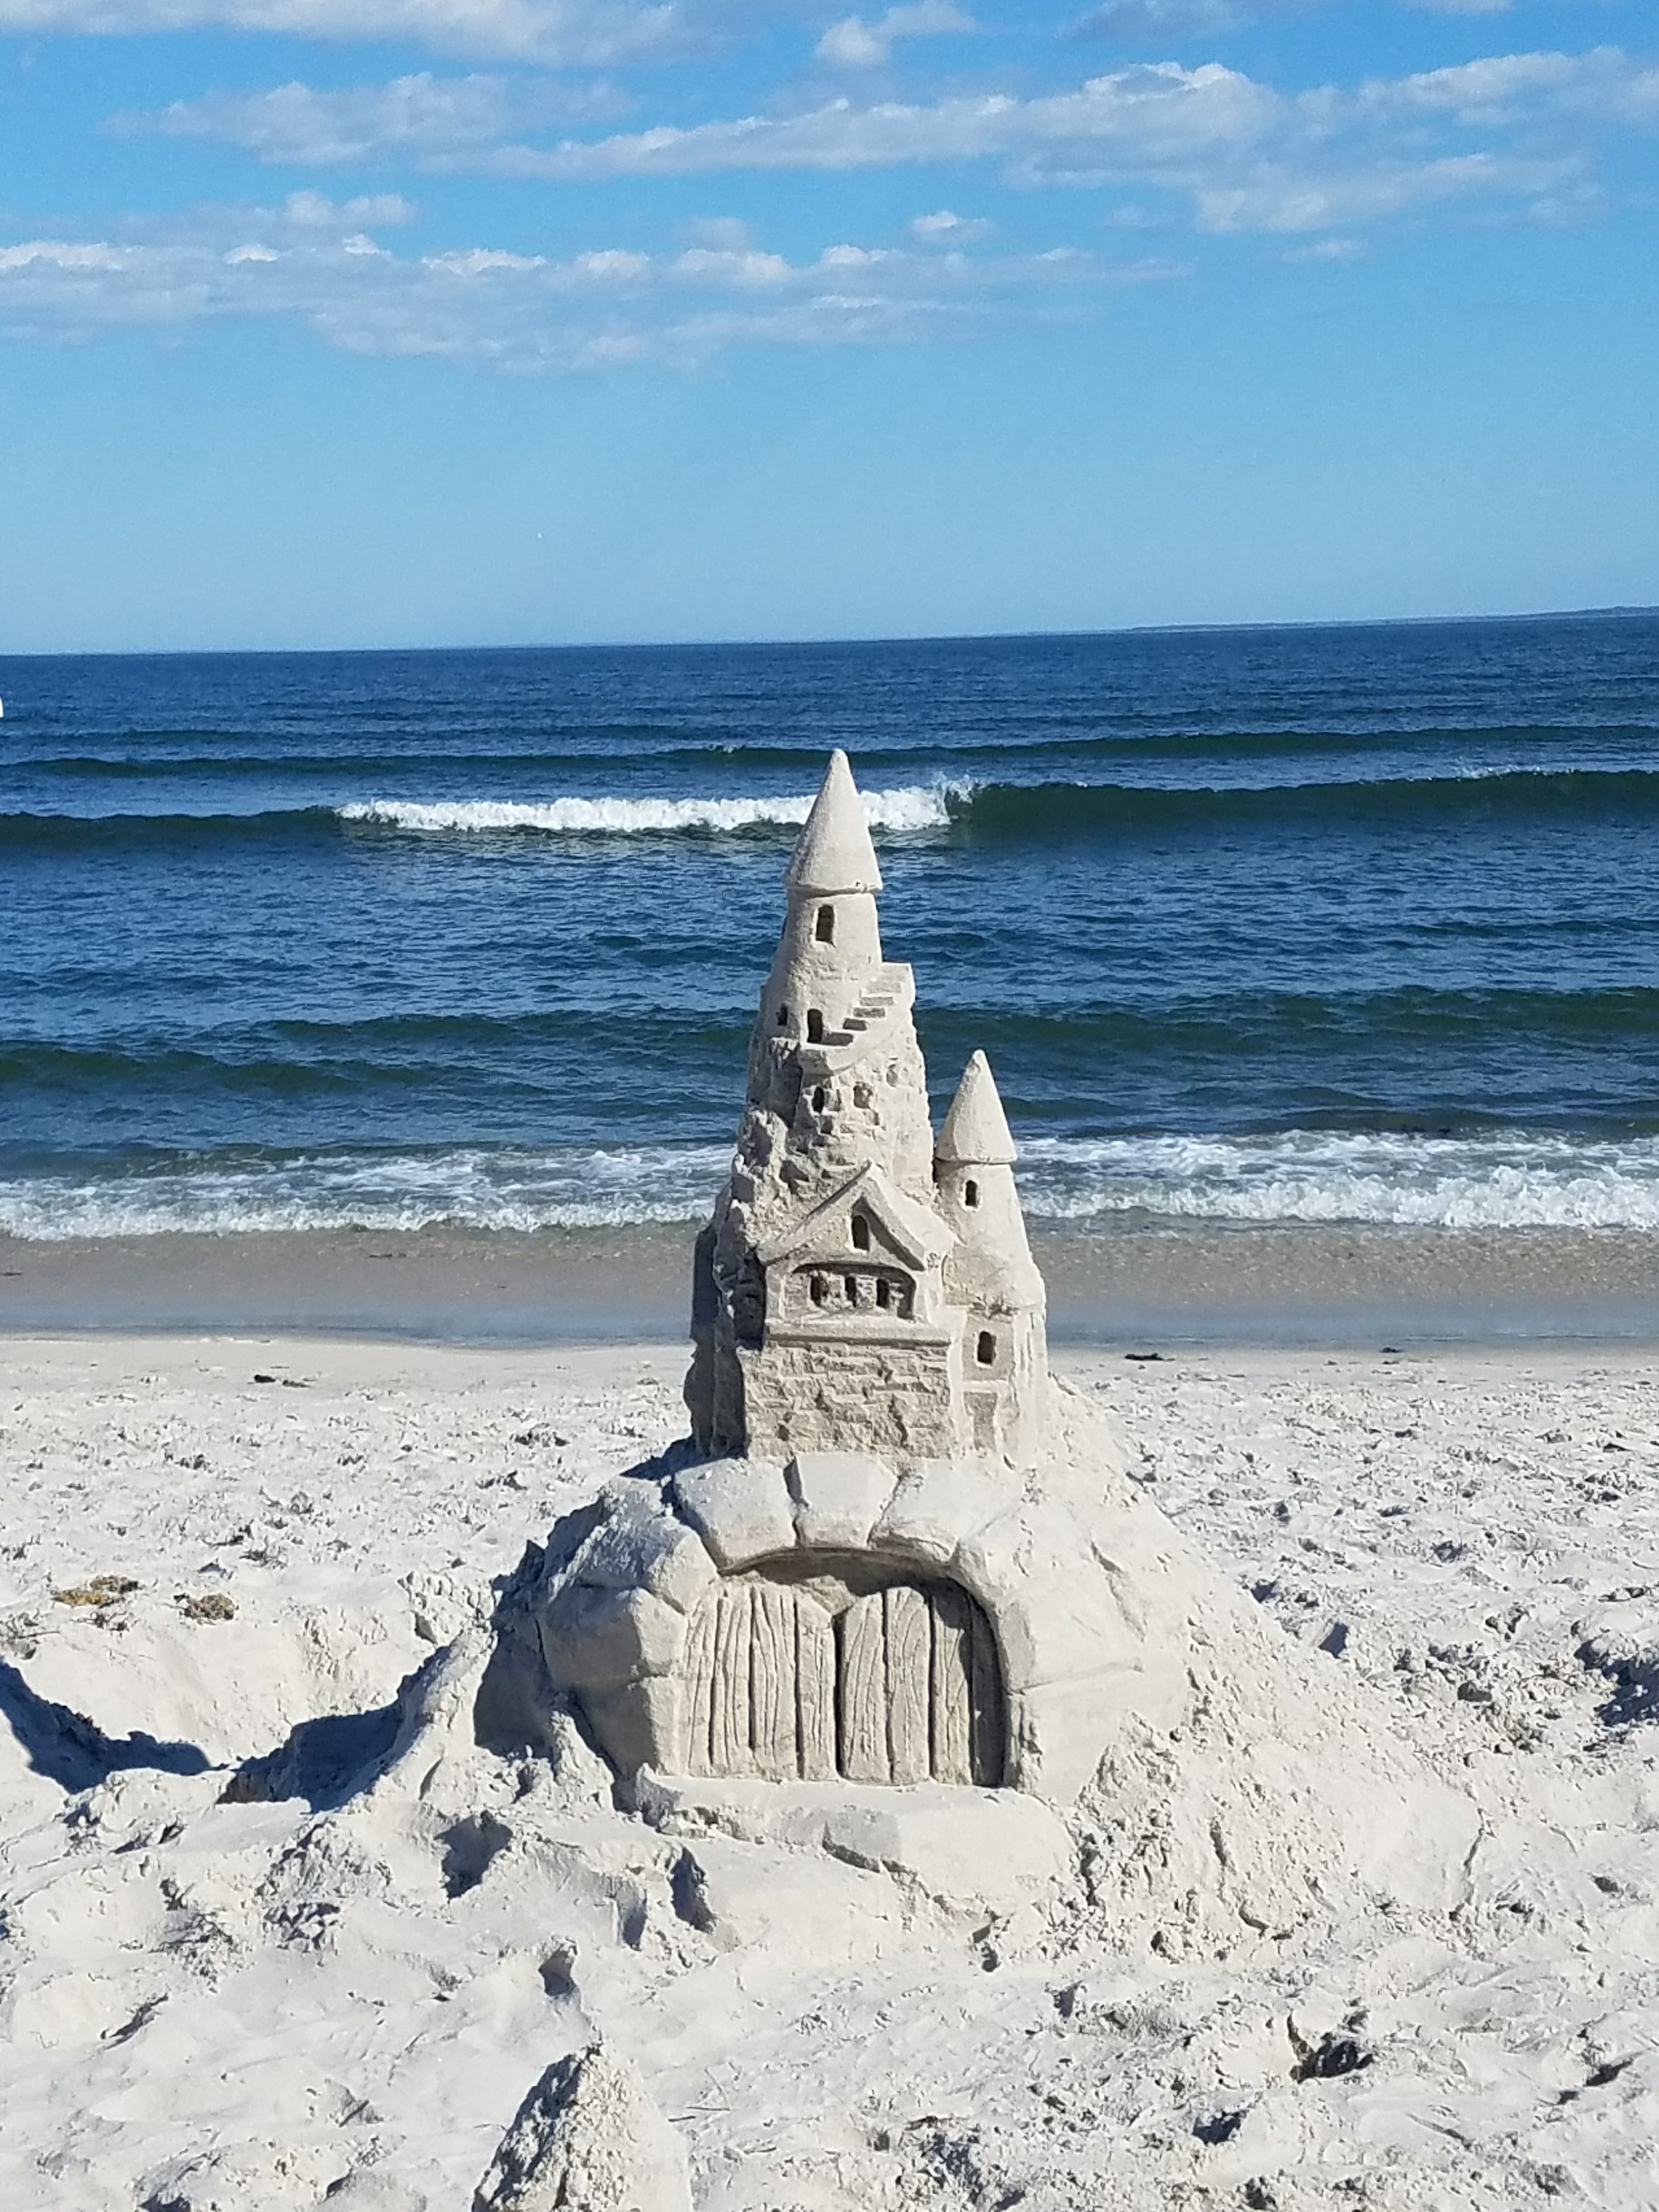 cool sandcastle (not ours)